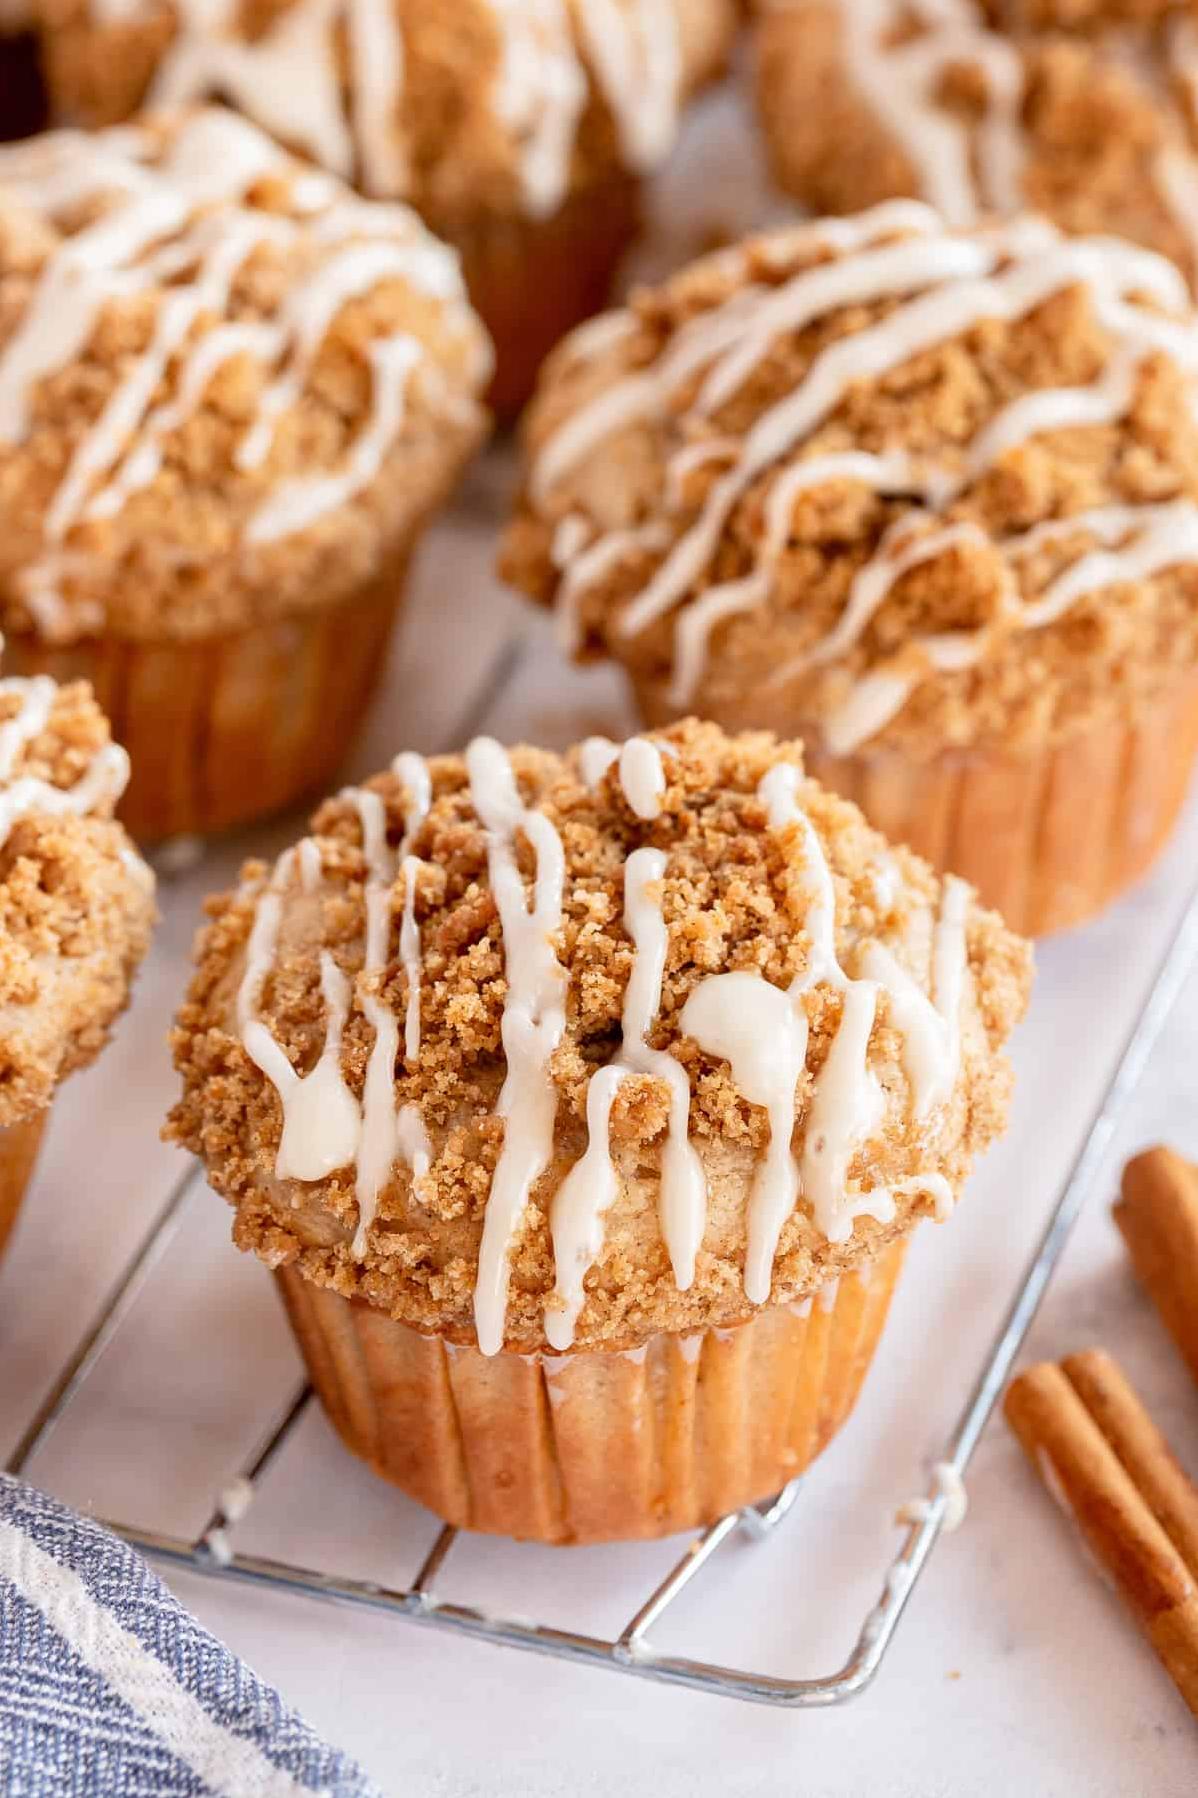  A cinnamon sugar topping adds an extra burst of flavor and texture to each bite.